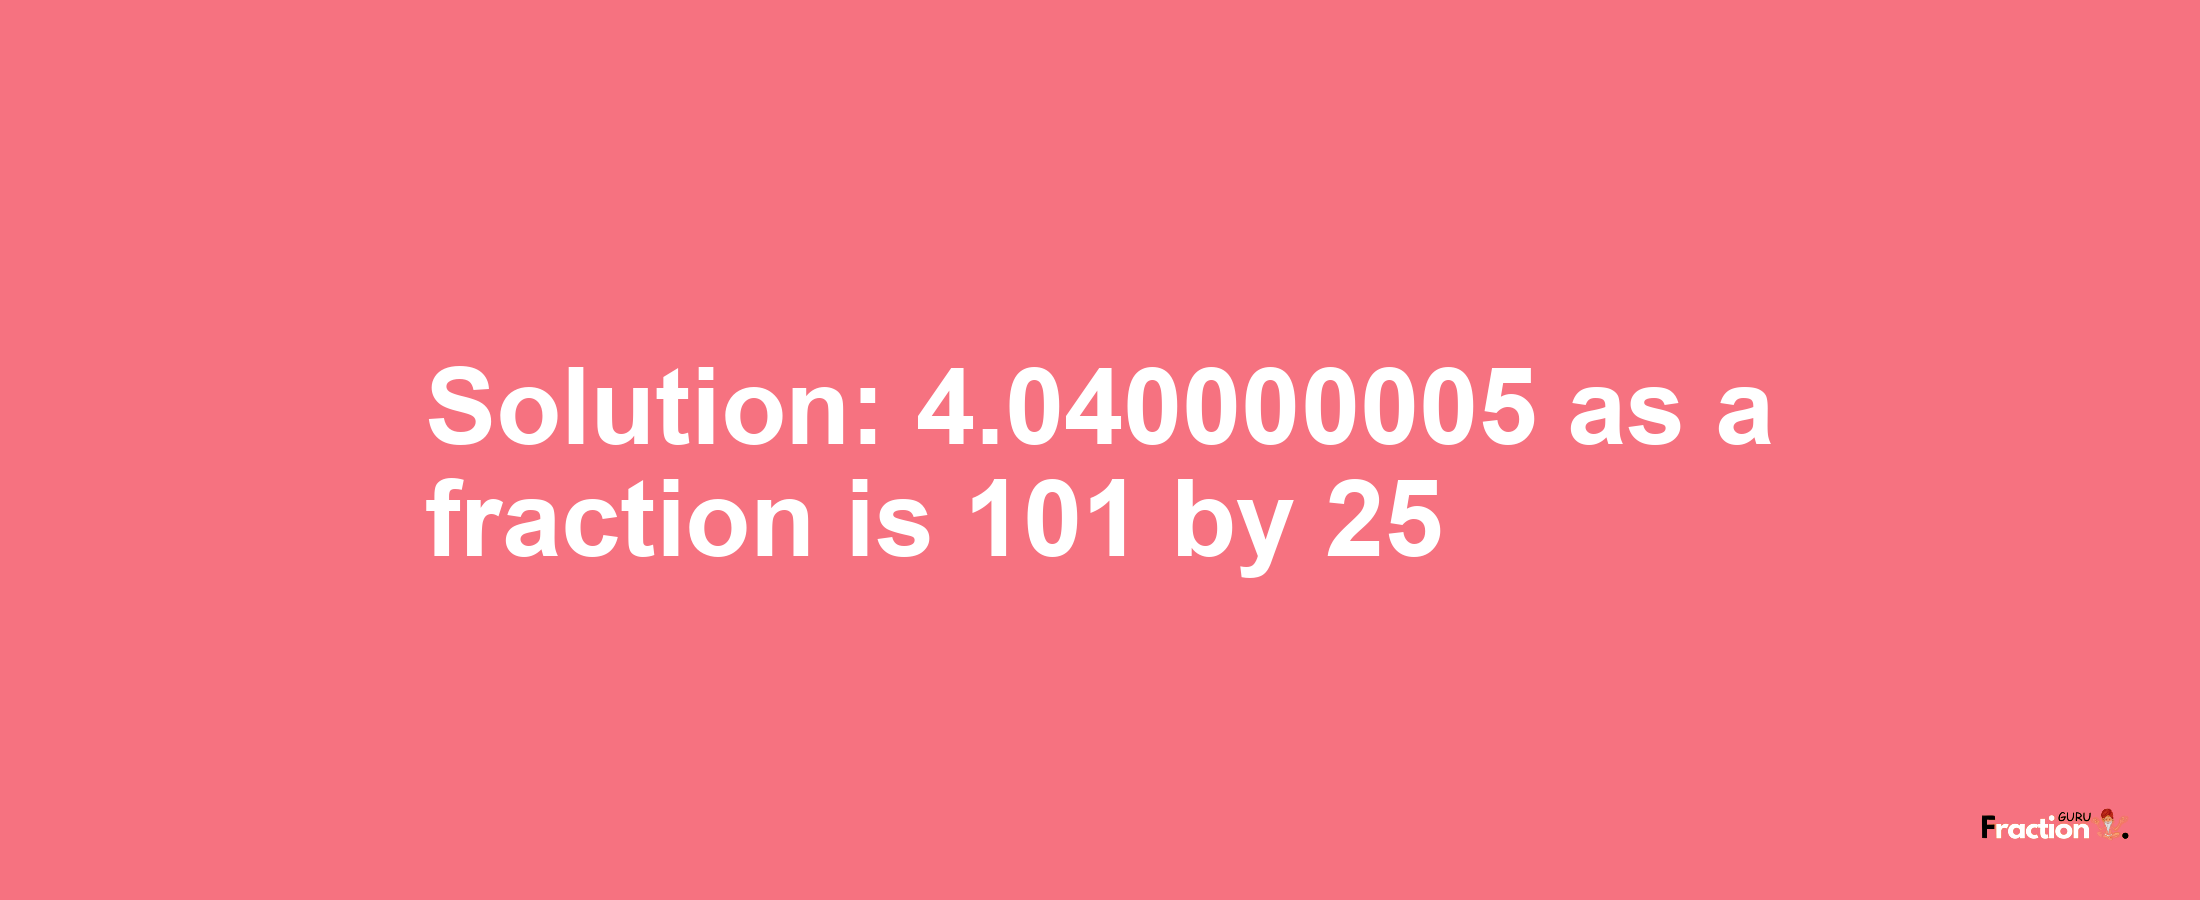 Solution:4.040000005 as a fraction is 101/25